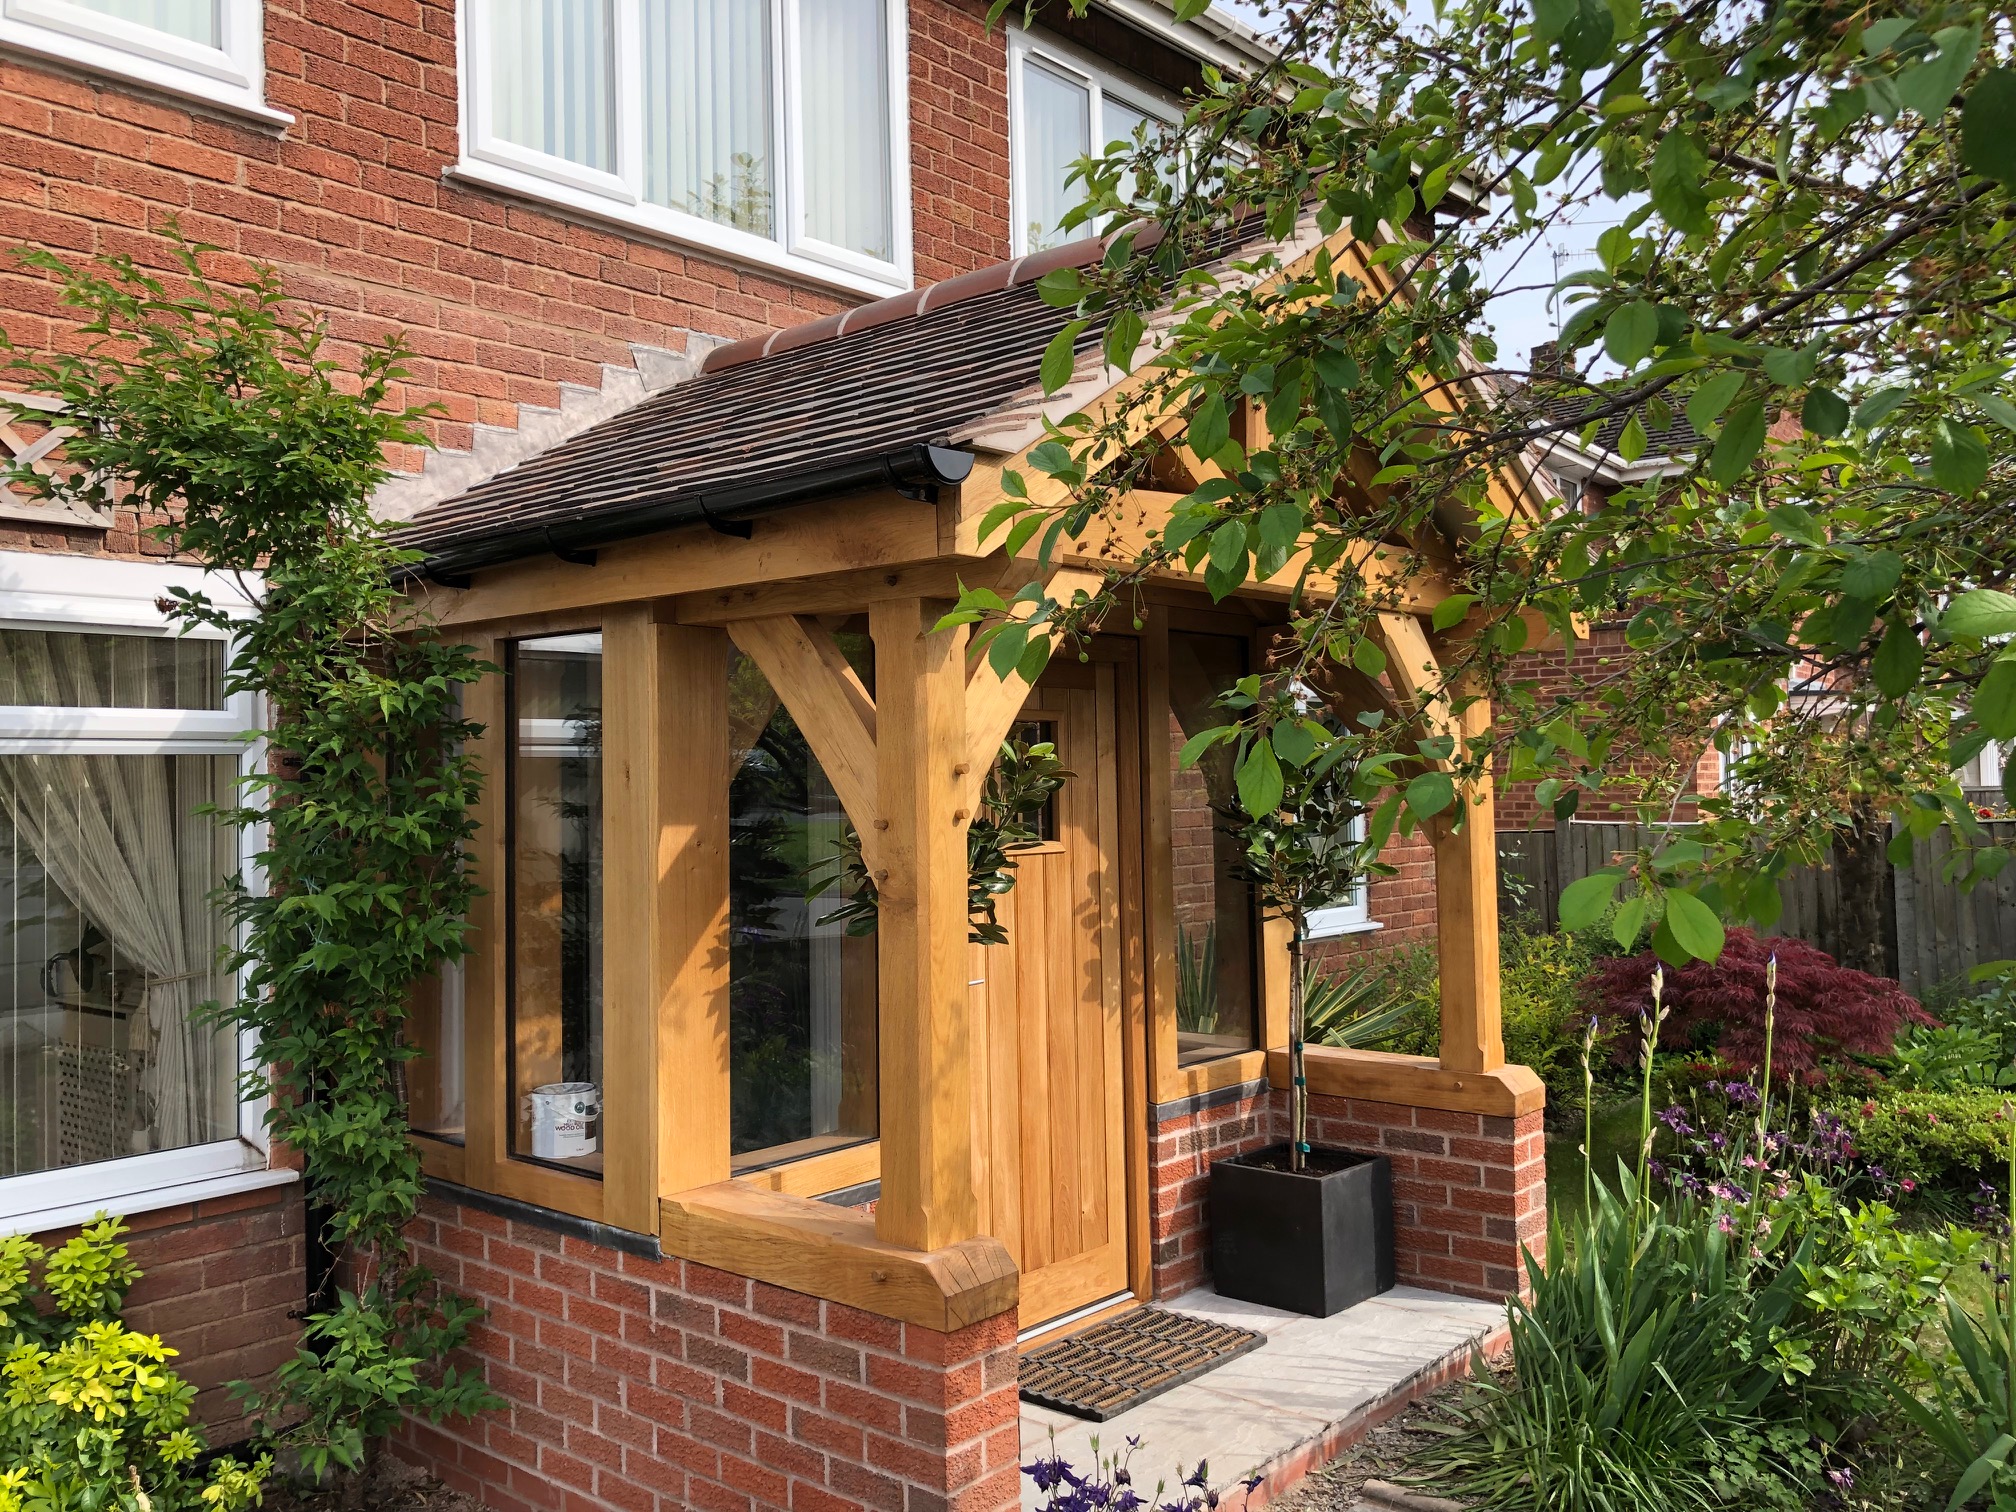 An enclosed oak framed porch with tiled roof